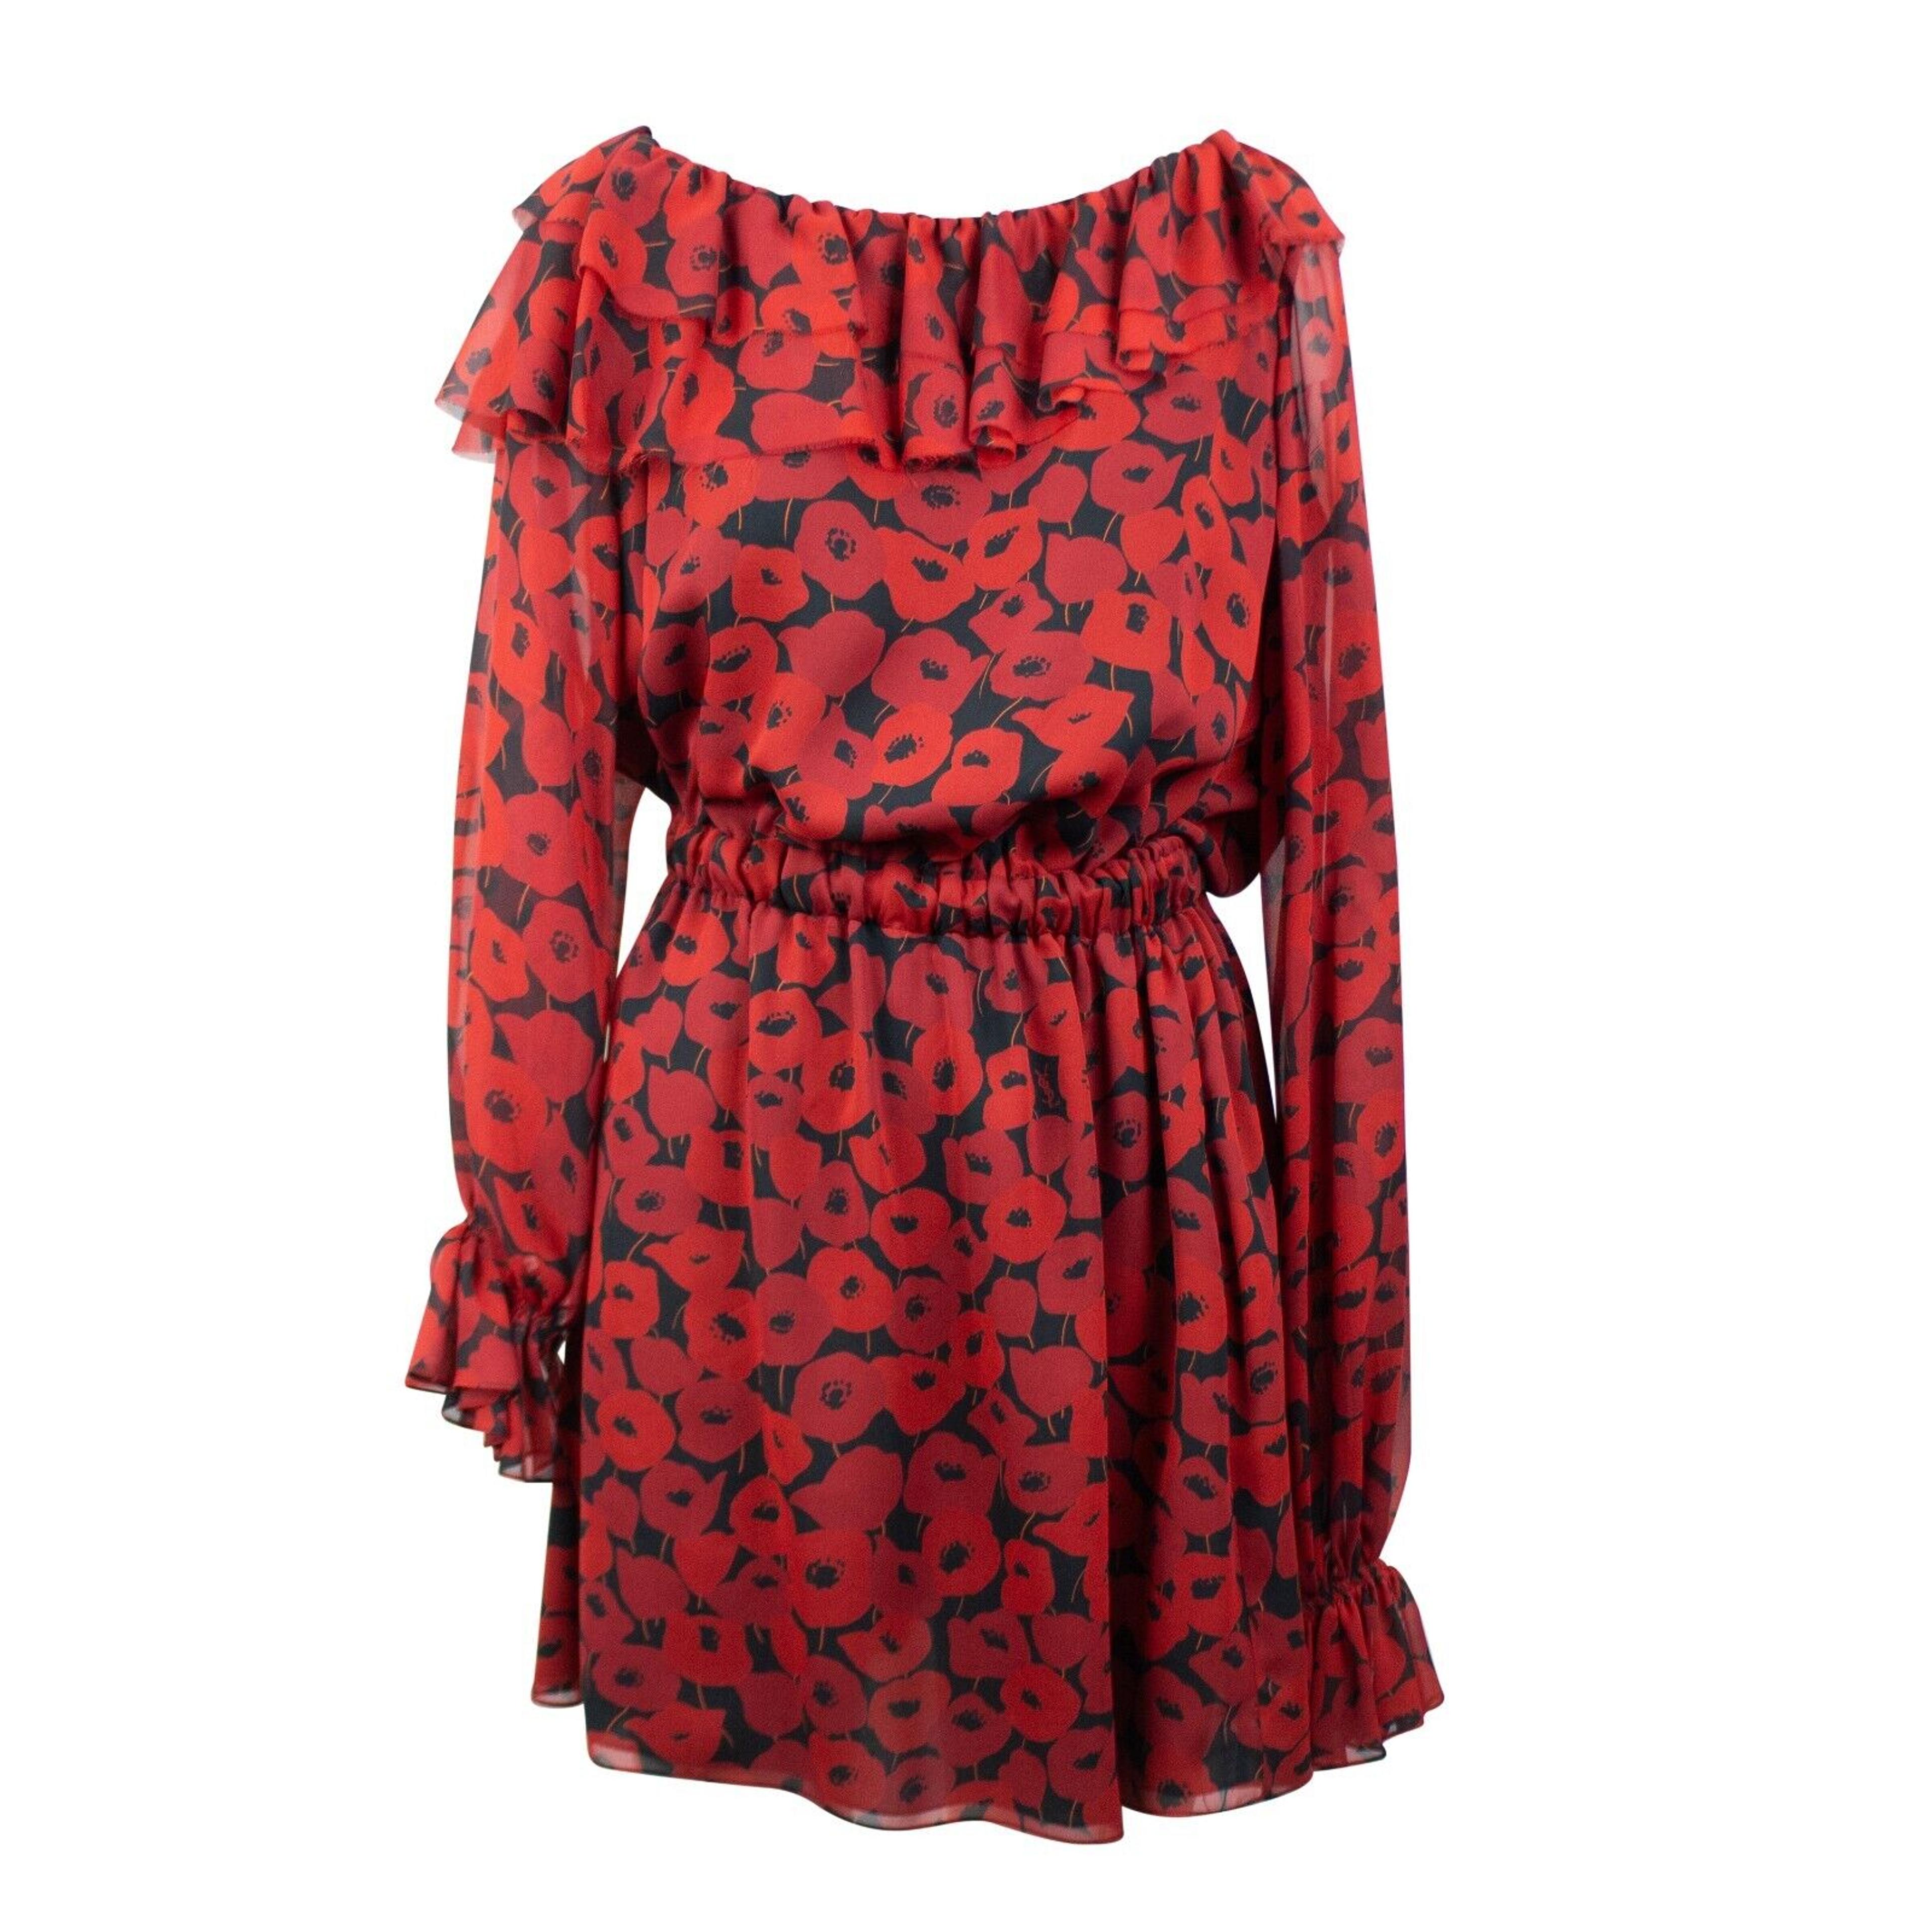 Alternate View 1 of Women's Red Off The Shoulder Floral Dress